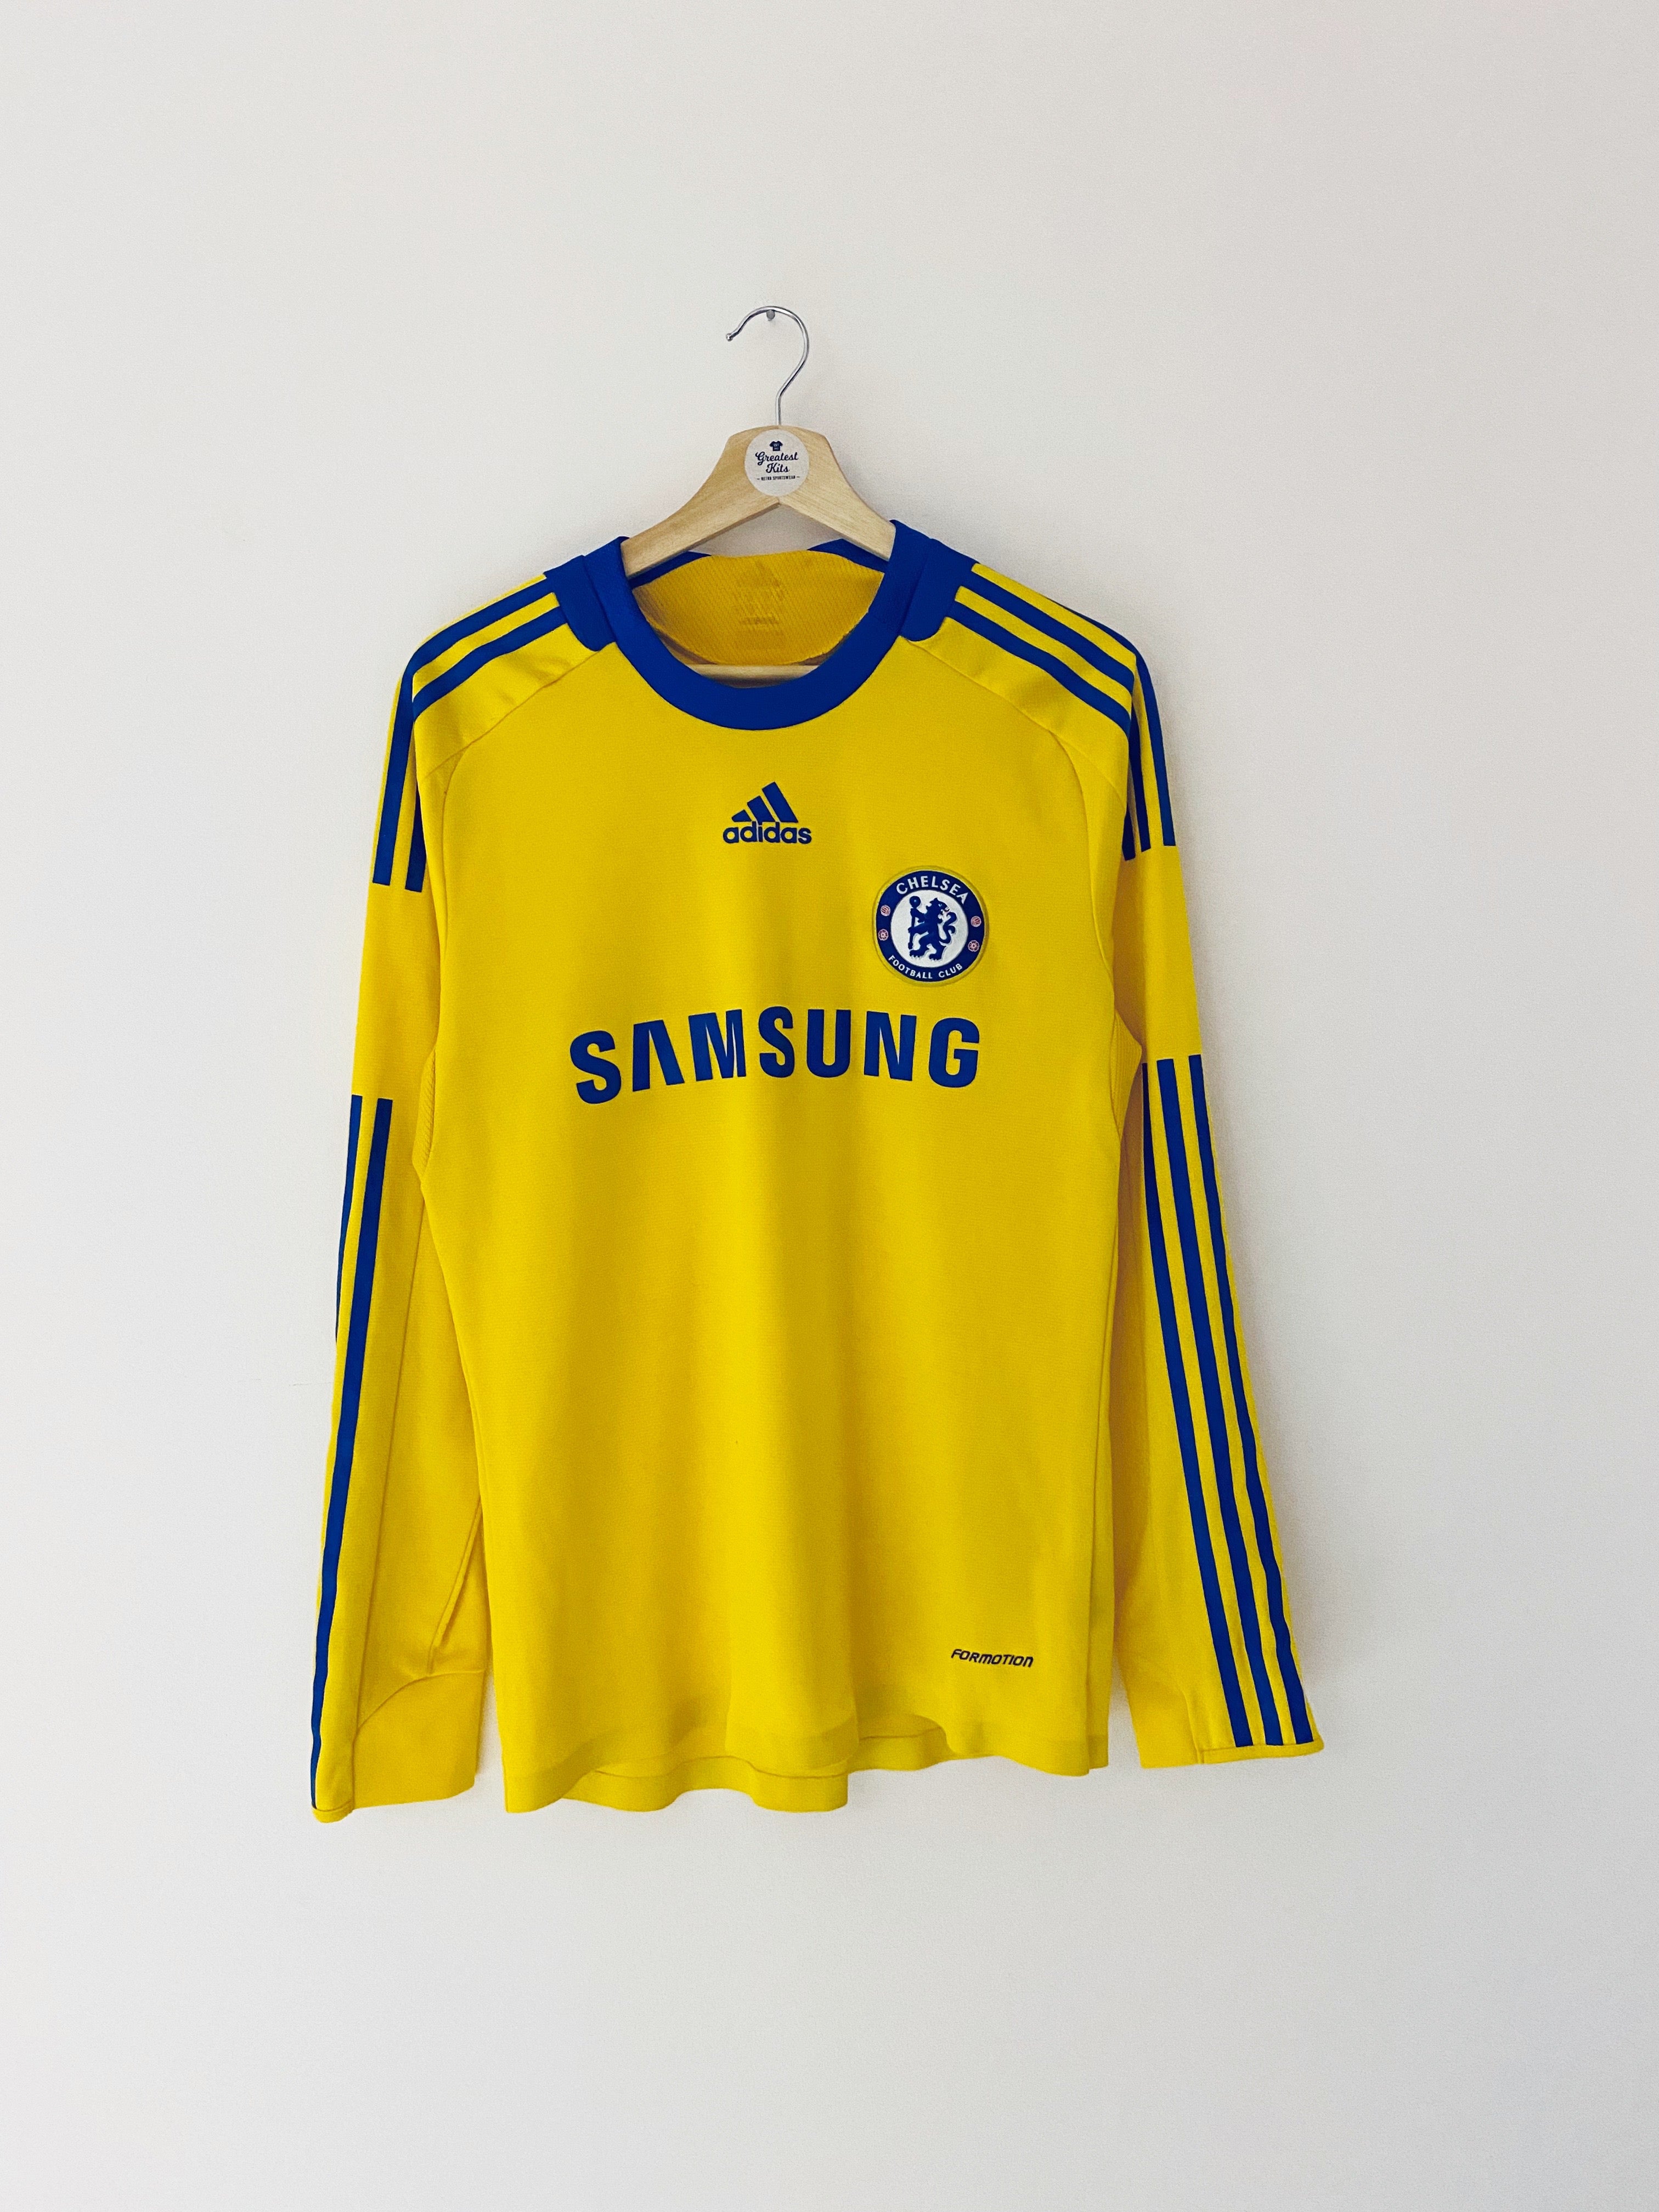 2008/09 Chelsea *Player Issue* Third L/S Shirt (M) 8.5/10